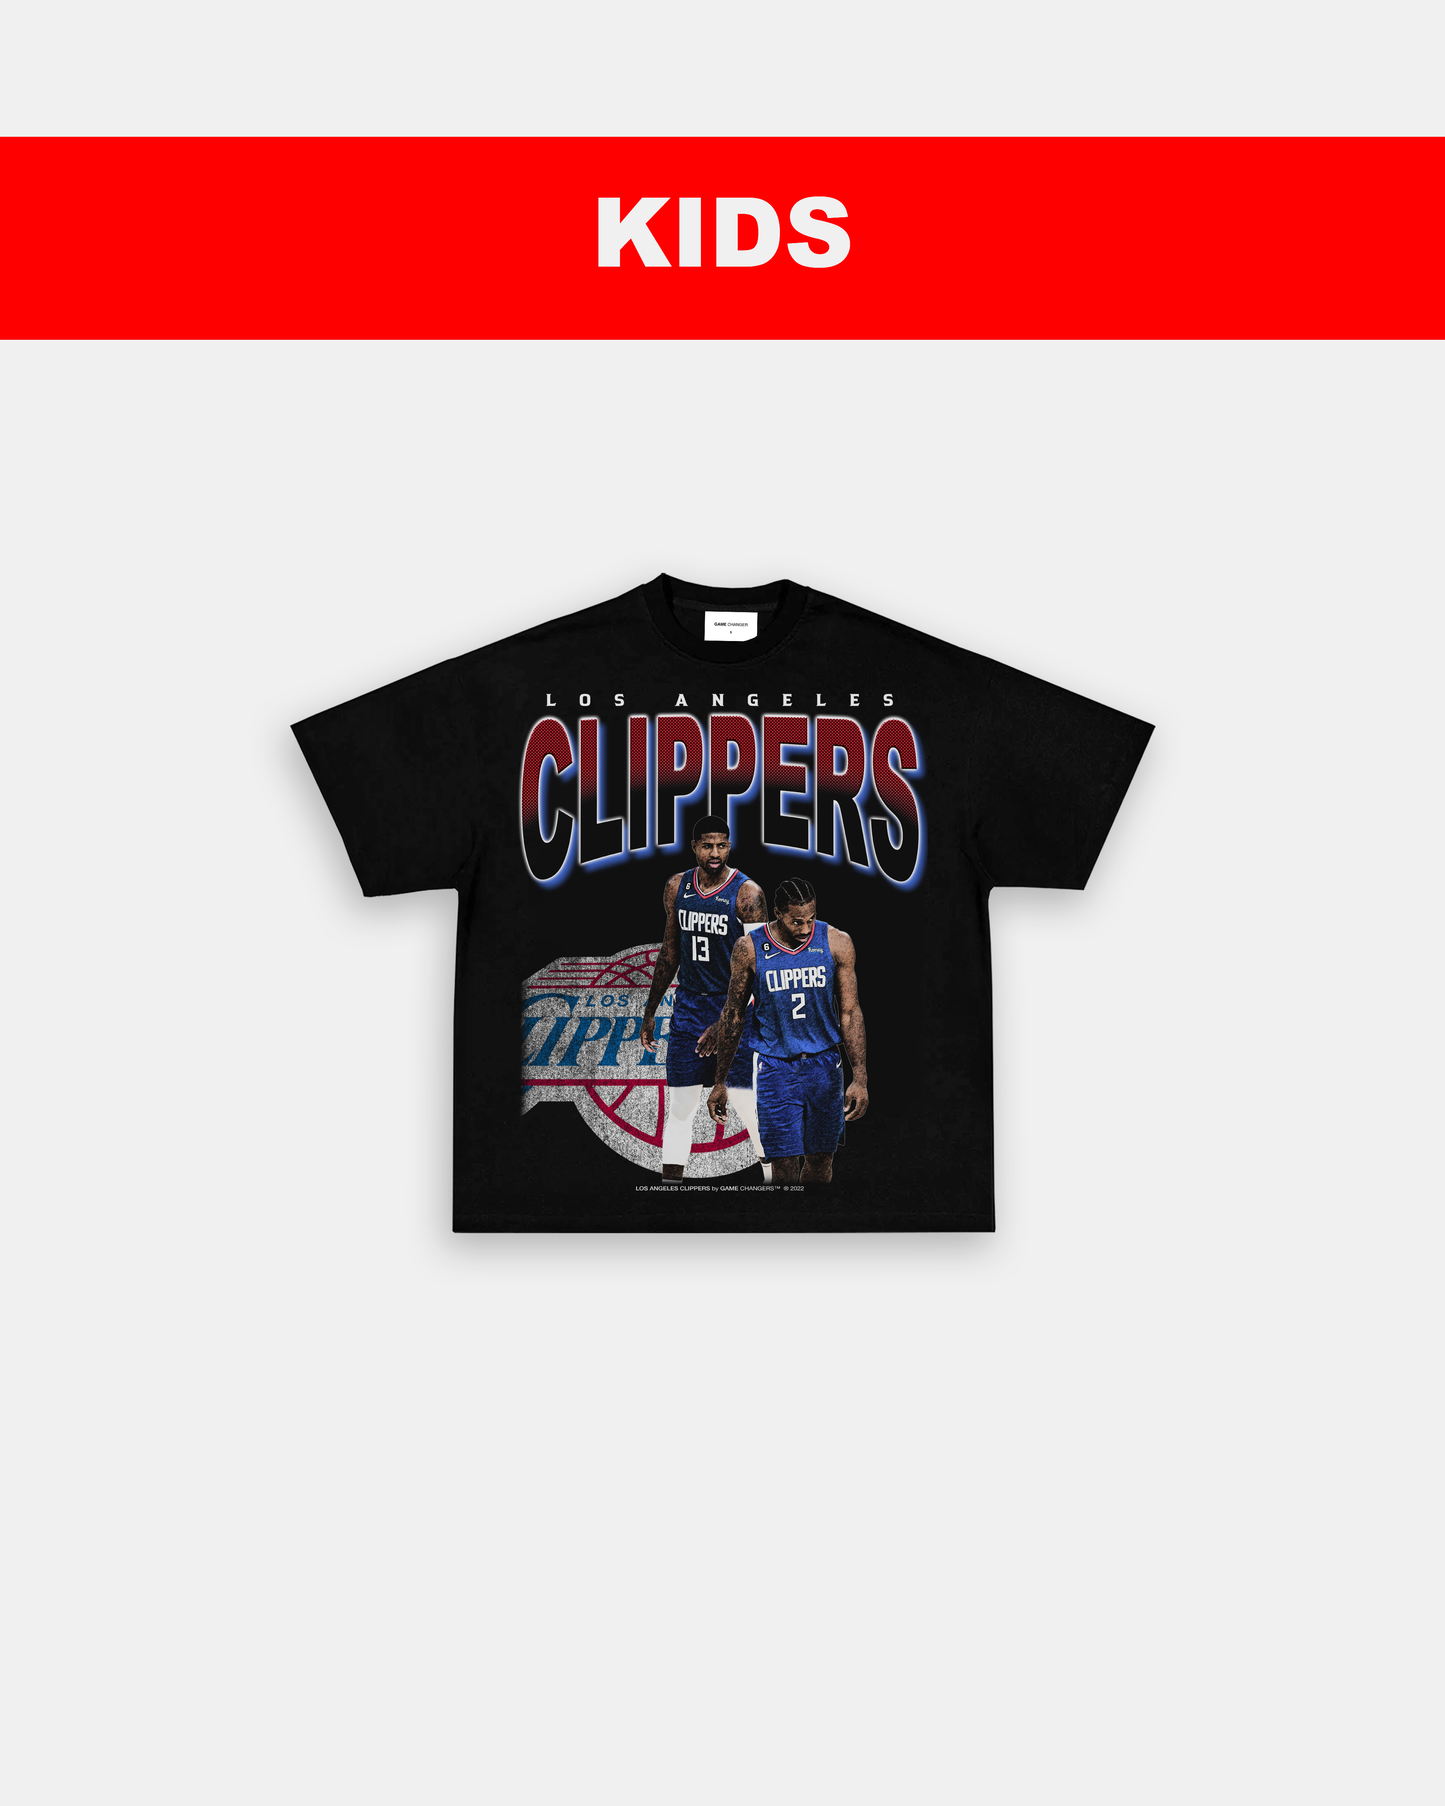 CLIPPERS - KIDS TEE